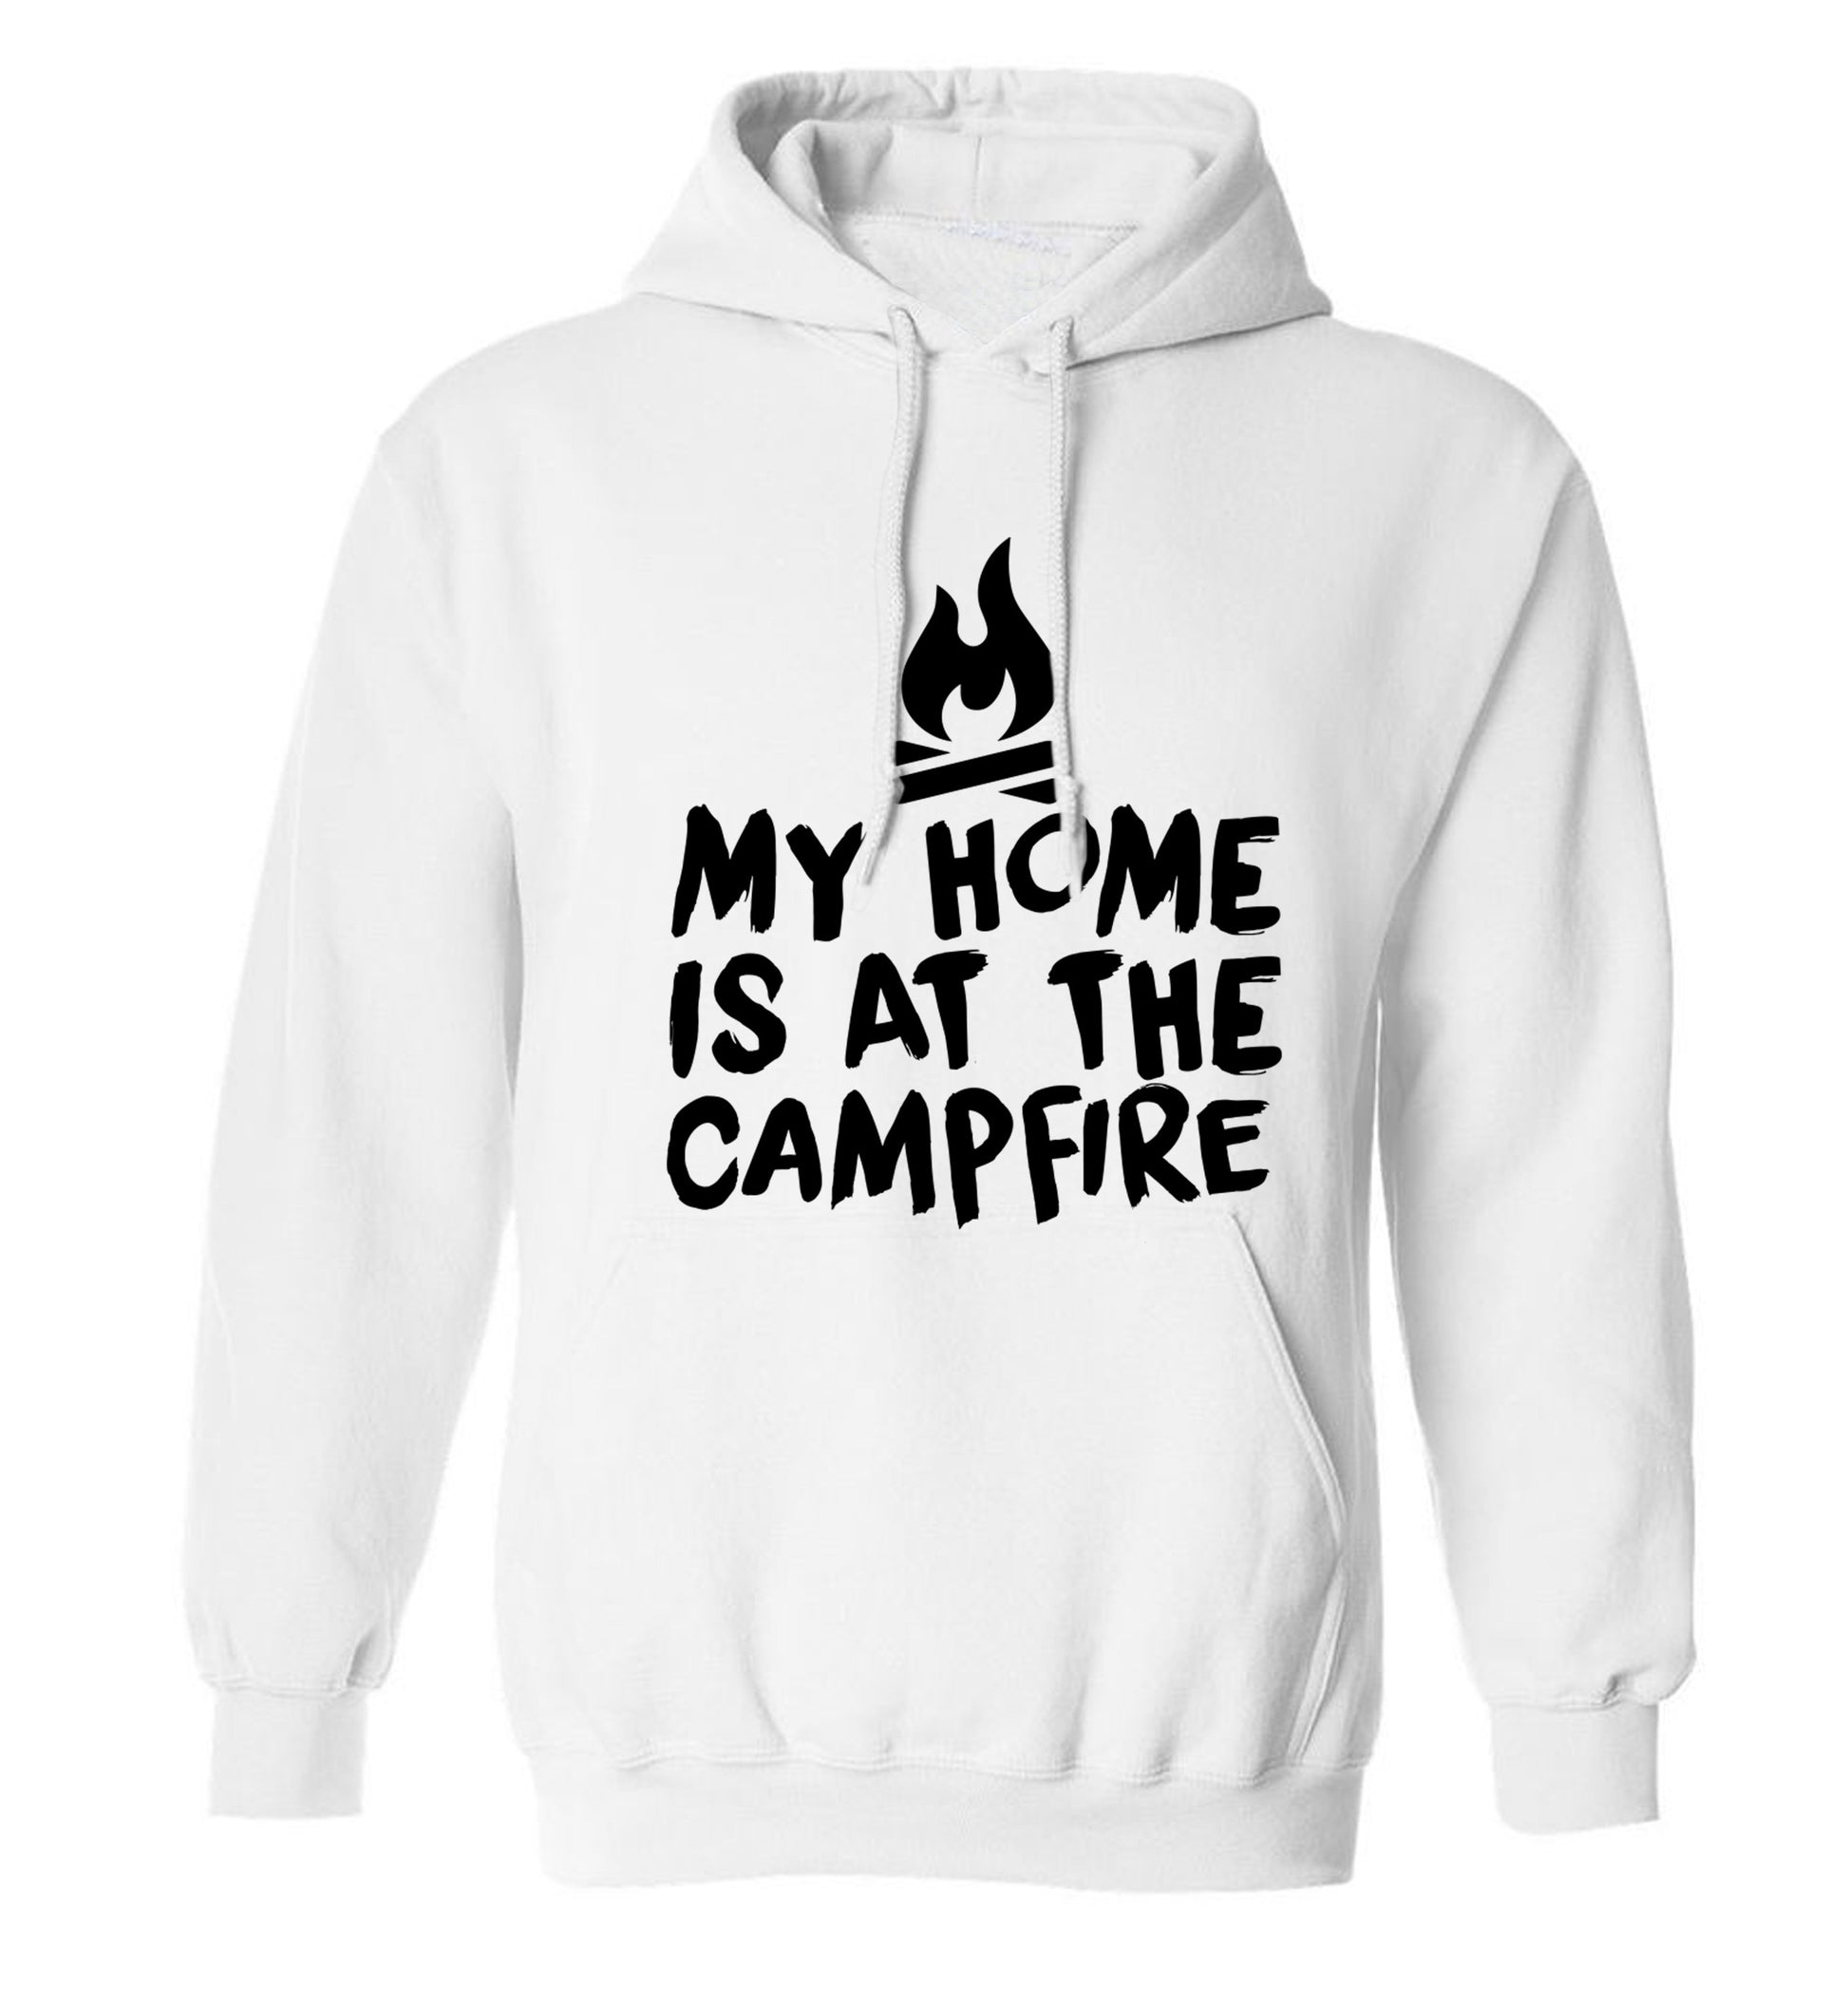 My home is at the campfire adults unisex white hoodie 2XL